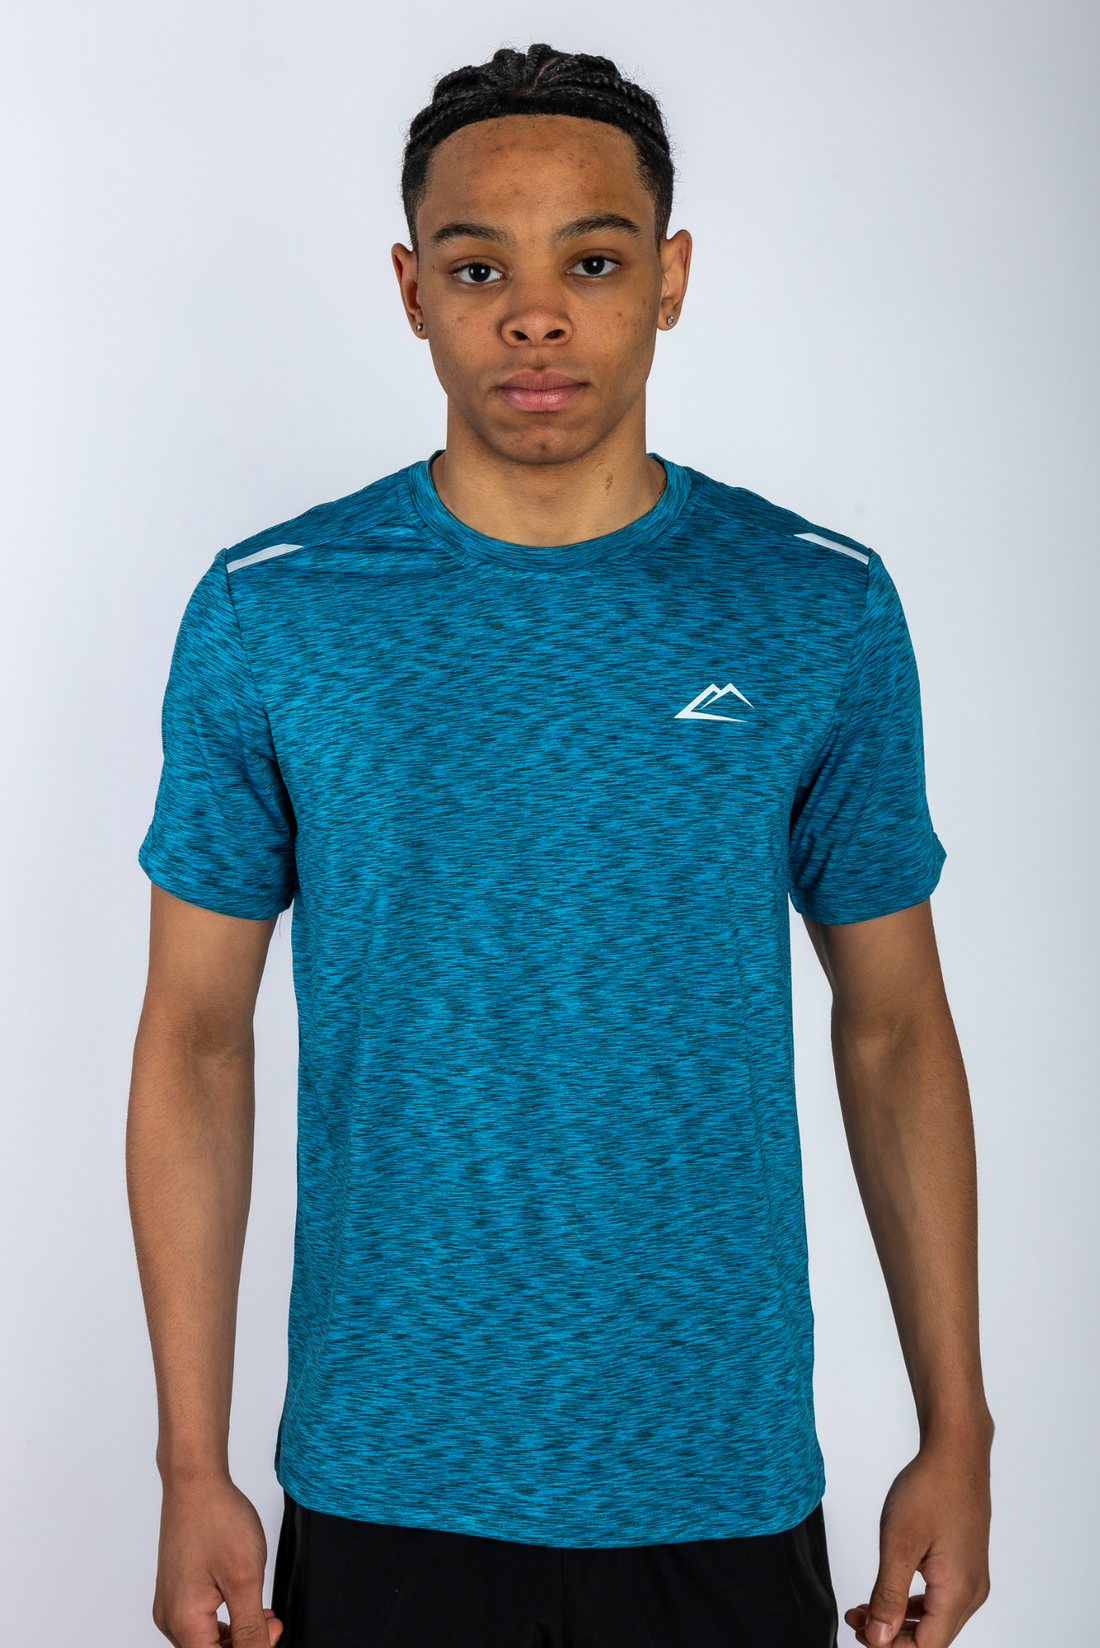 Flywire 2.0 T-Shirt - Crystal Teal/Black